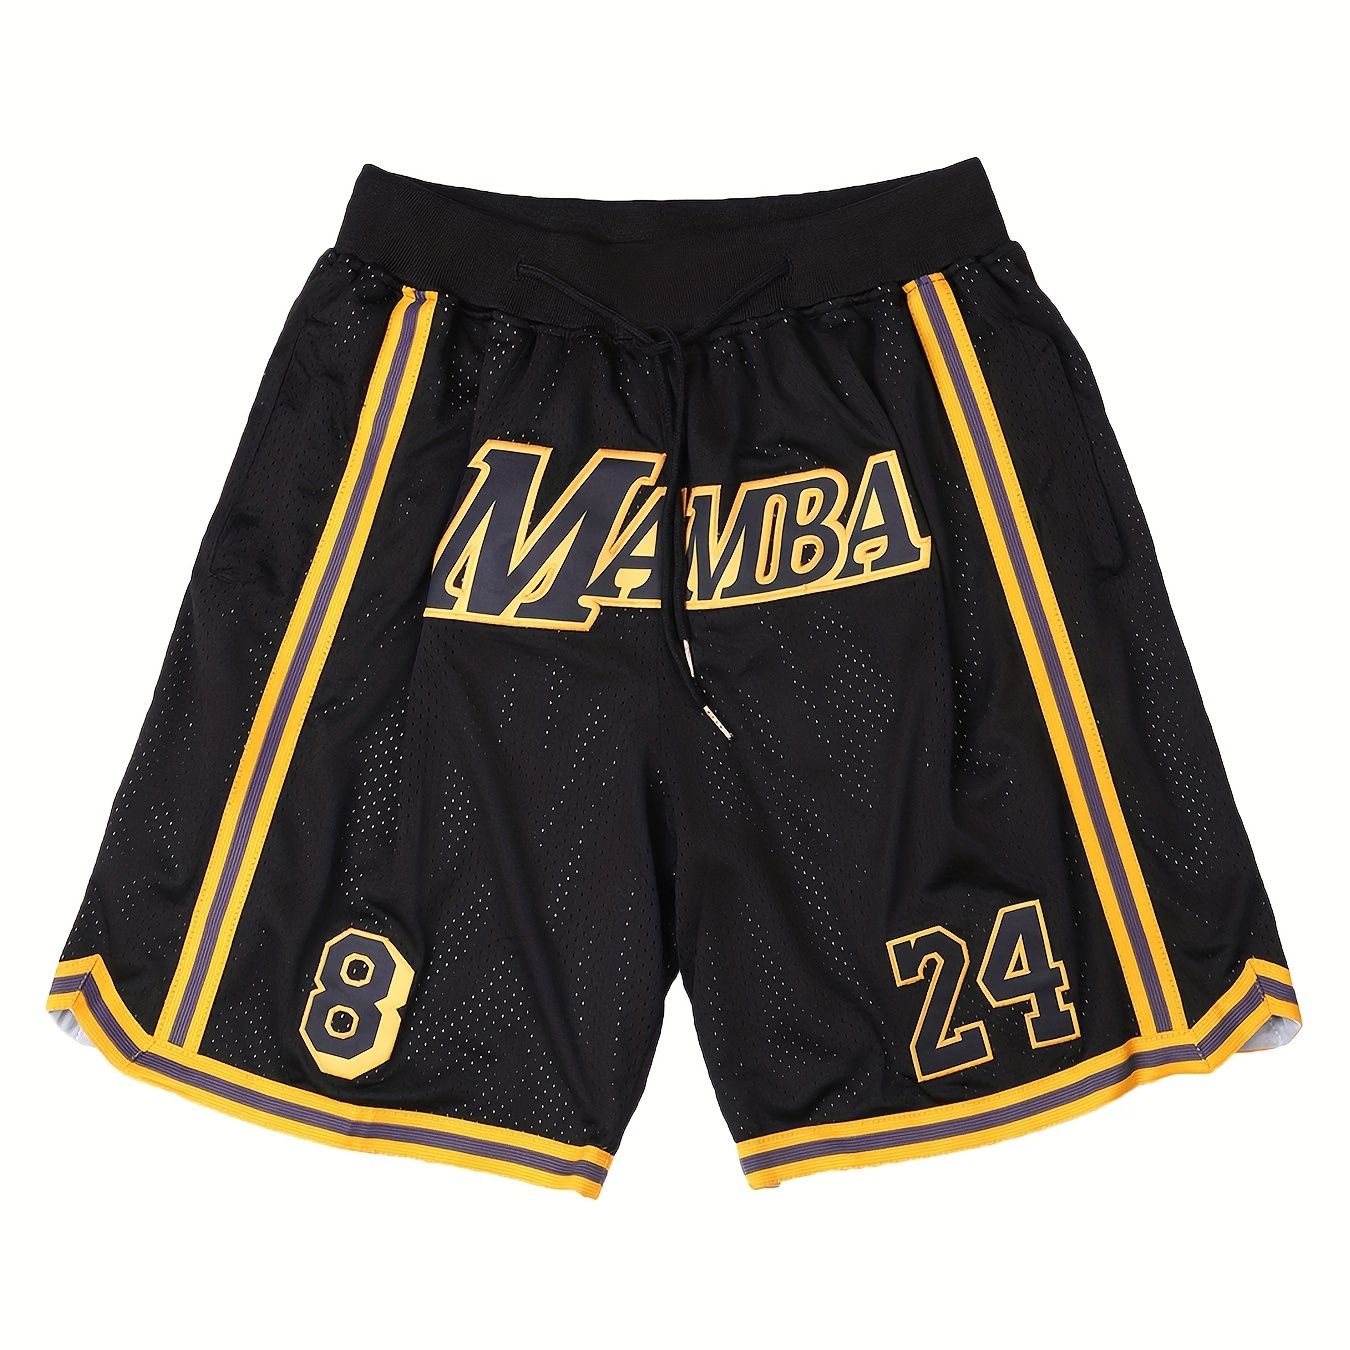 

Men's Vintage Mesh Embroidered Drawstring Shorts With Pockets, Quick Drying Breathable Basketball Shorts For Summer Outdoor